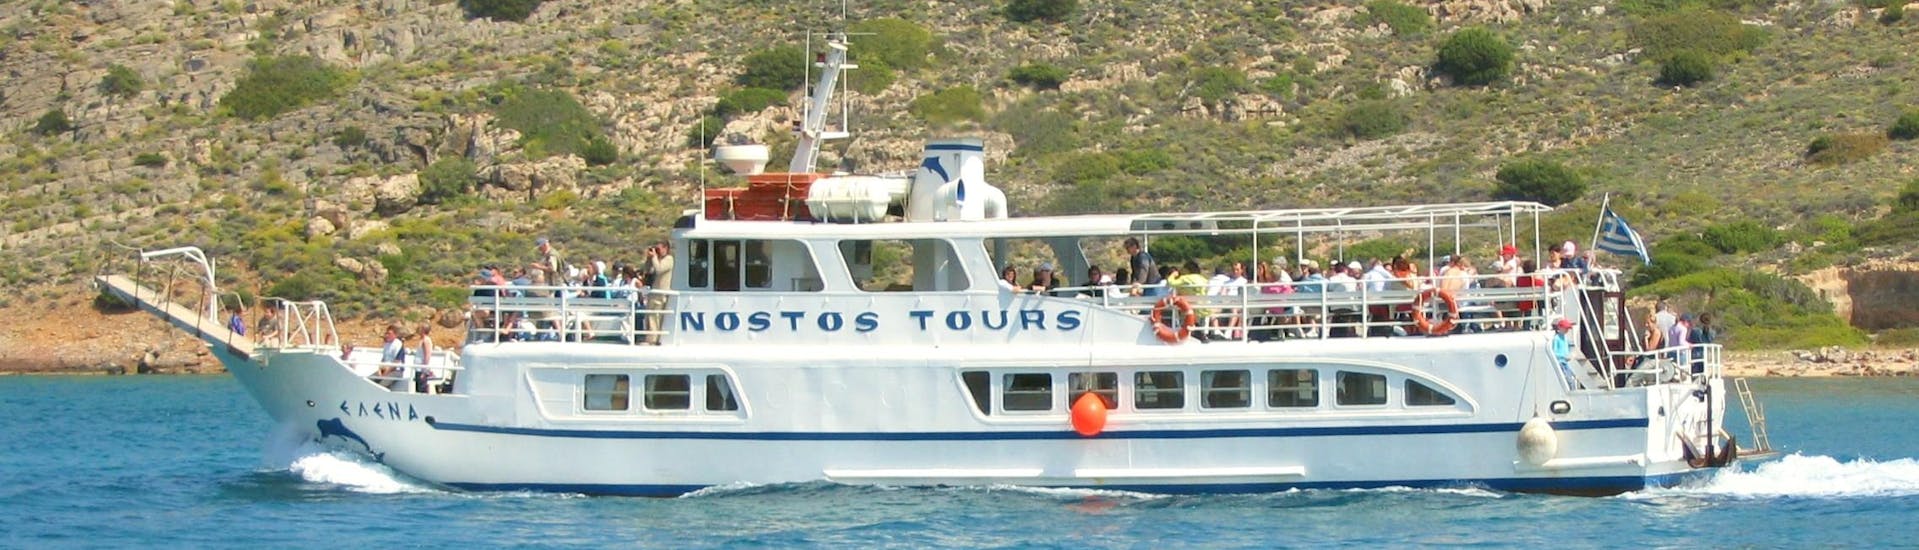 The boat used for the boat trip to Spinalonga Island with swimming by Nostos Cruises is sailing across the clear blue waters off the Cretan coast.